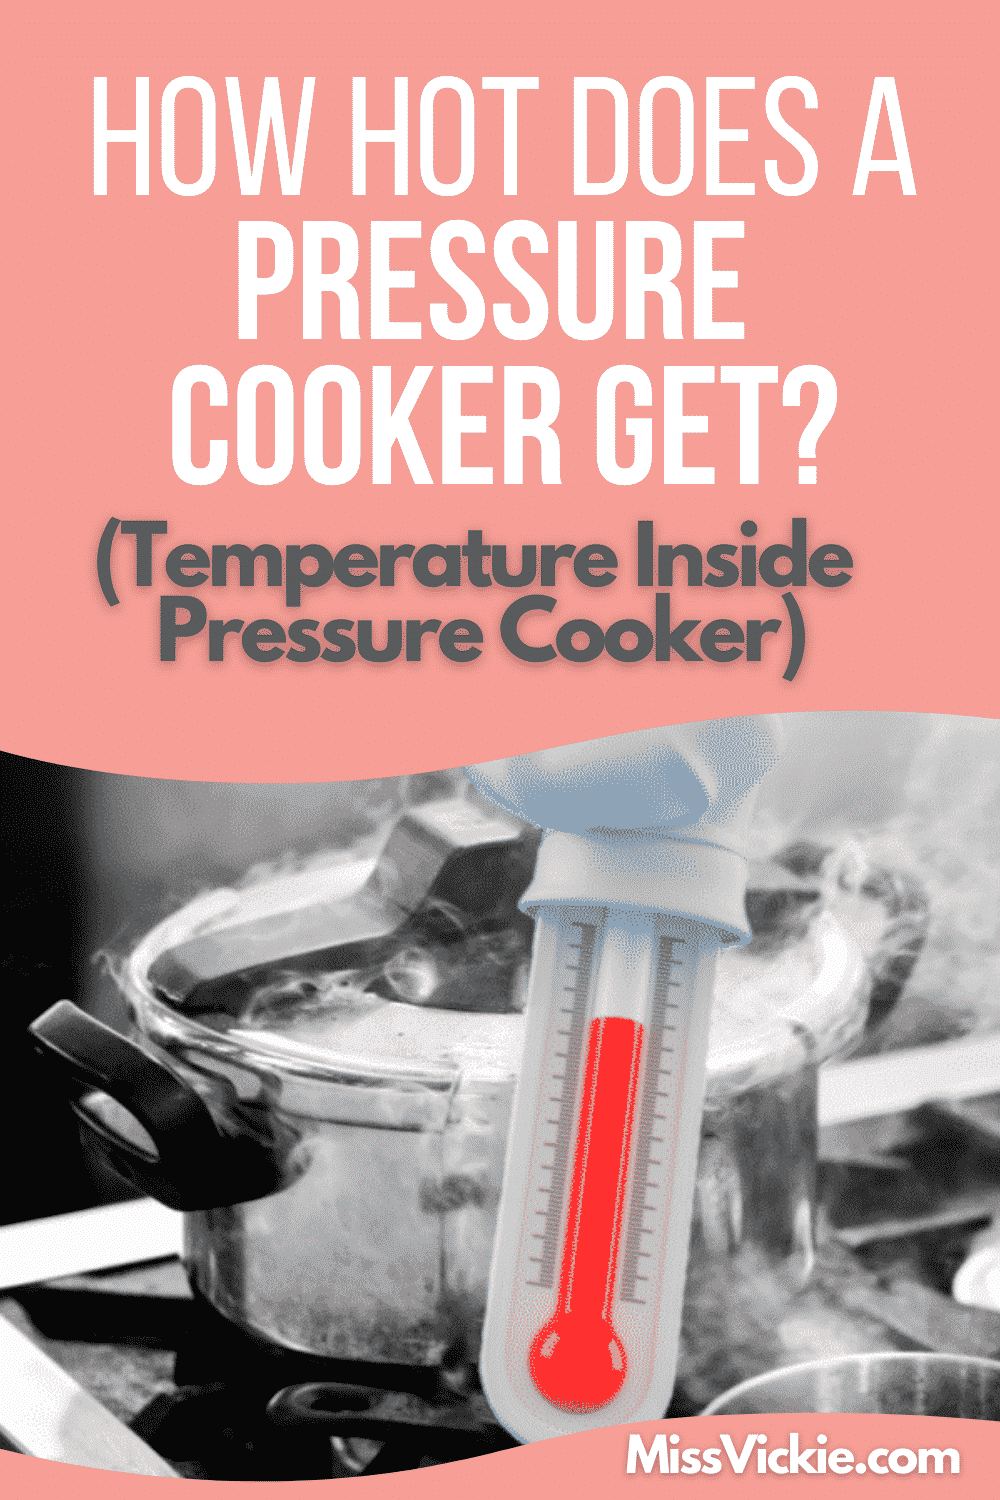 How Hot Does A Pressure Cooker Get